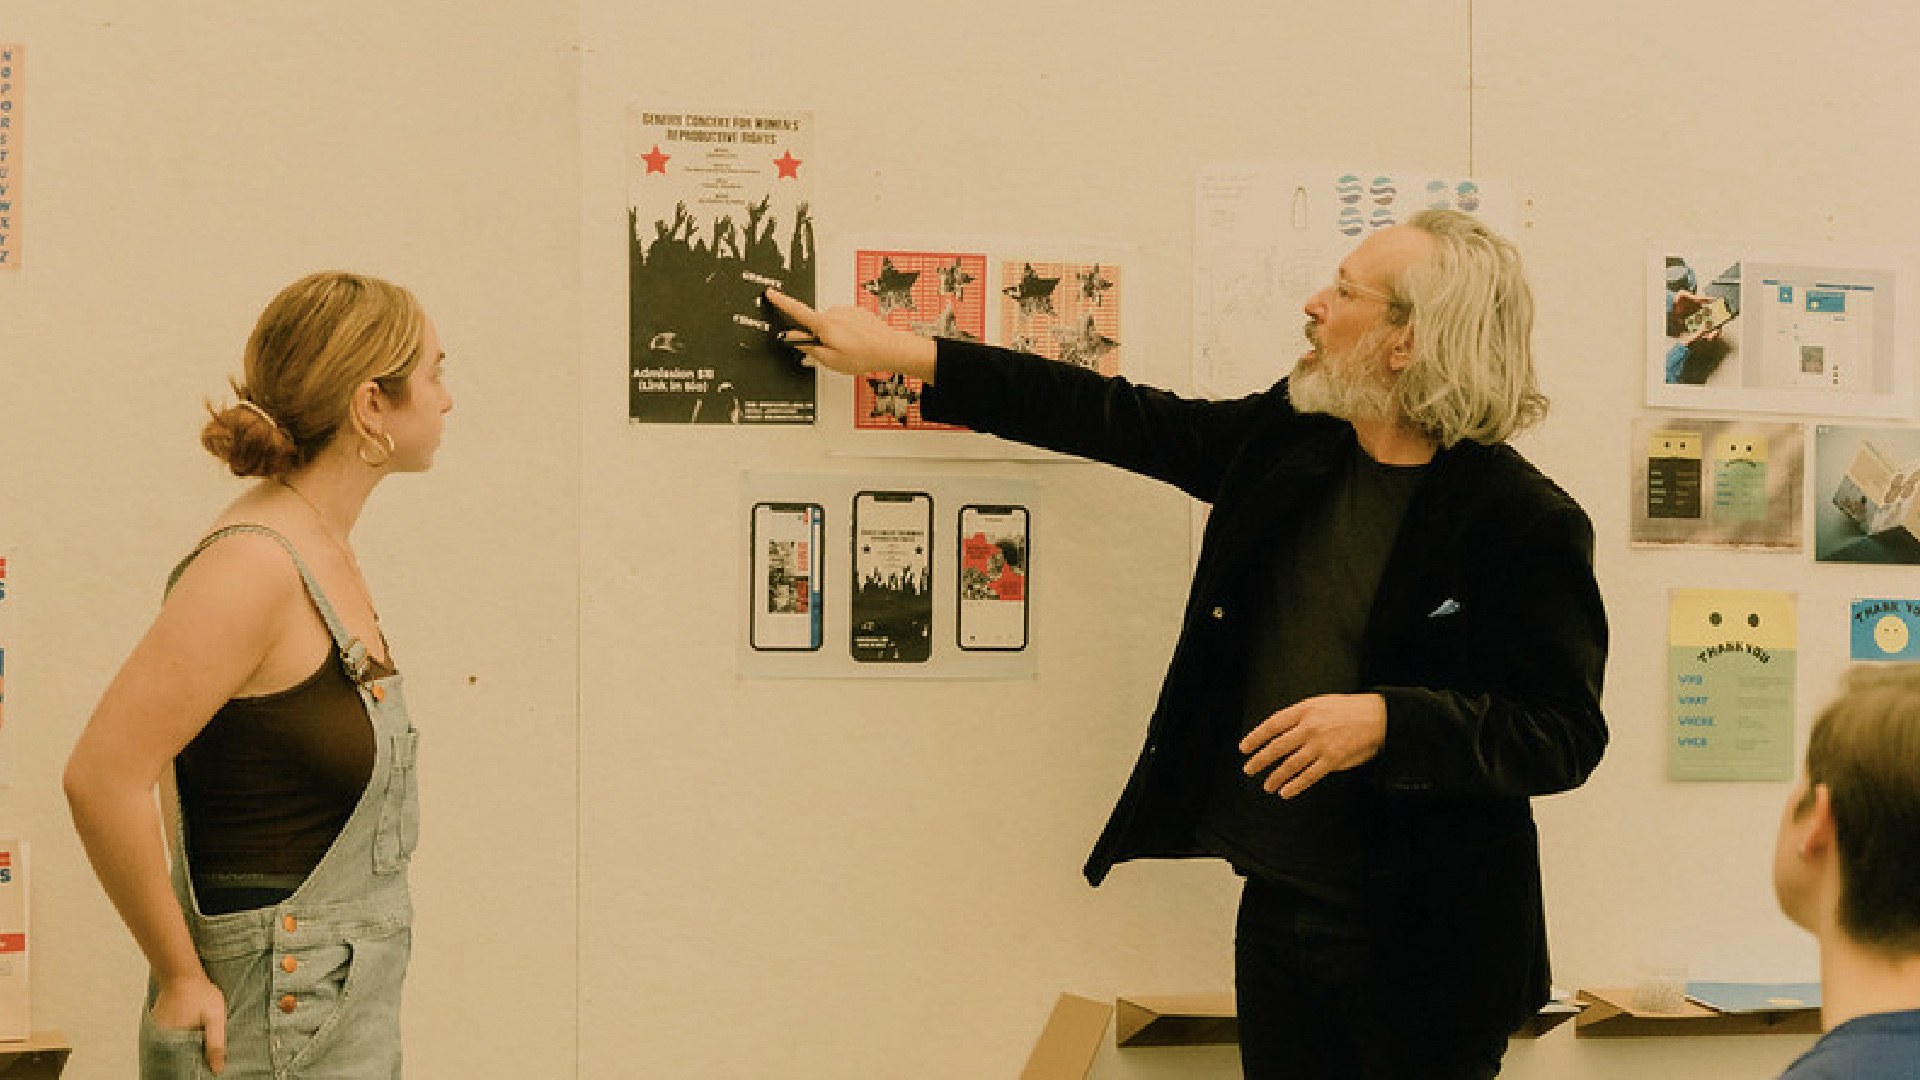 Image of a design class final review, with the student's work pinned up to the wall, while the student and the teacher discuss the work on the board.